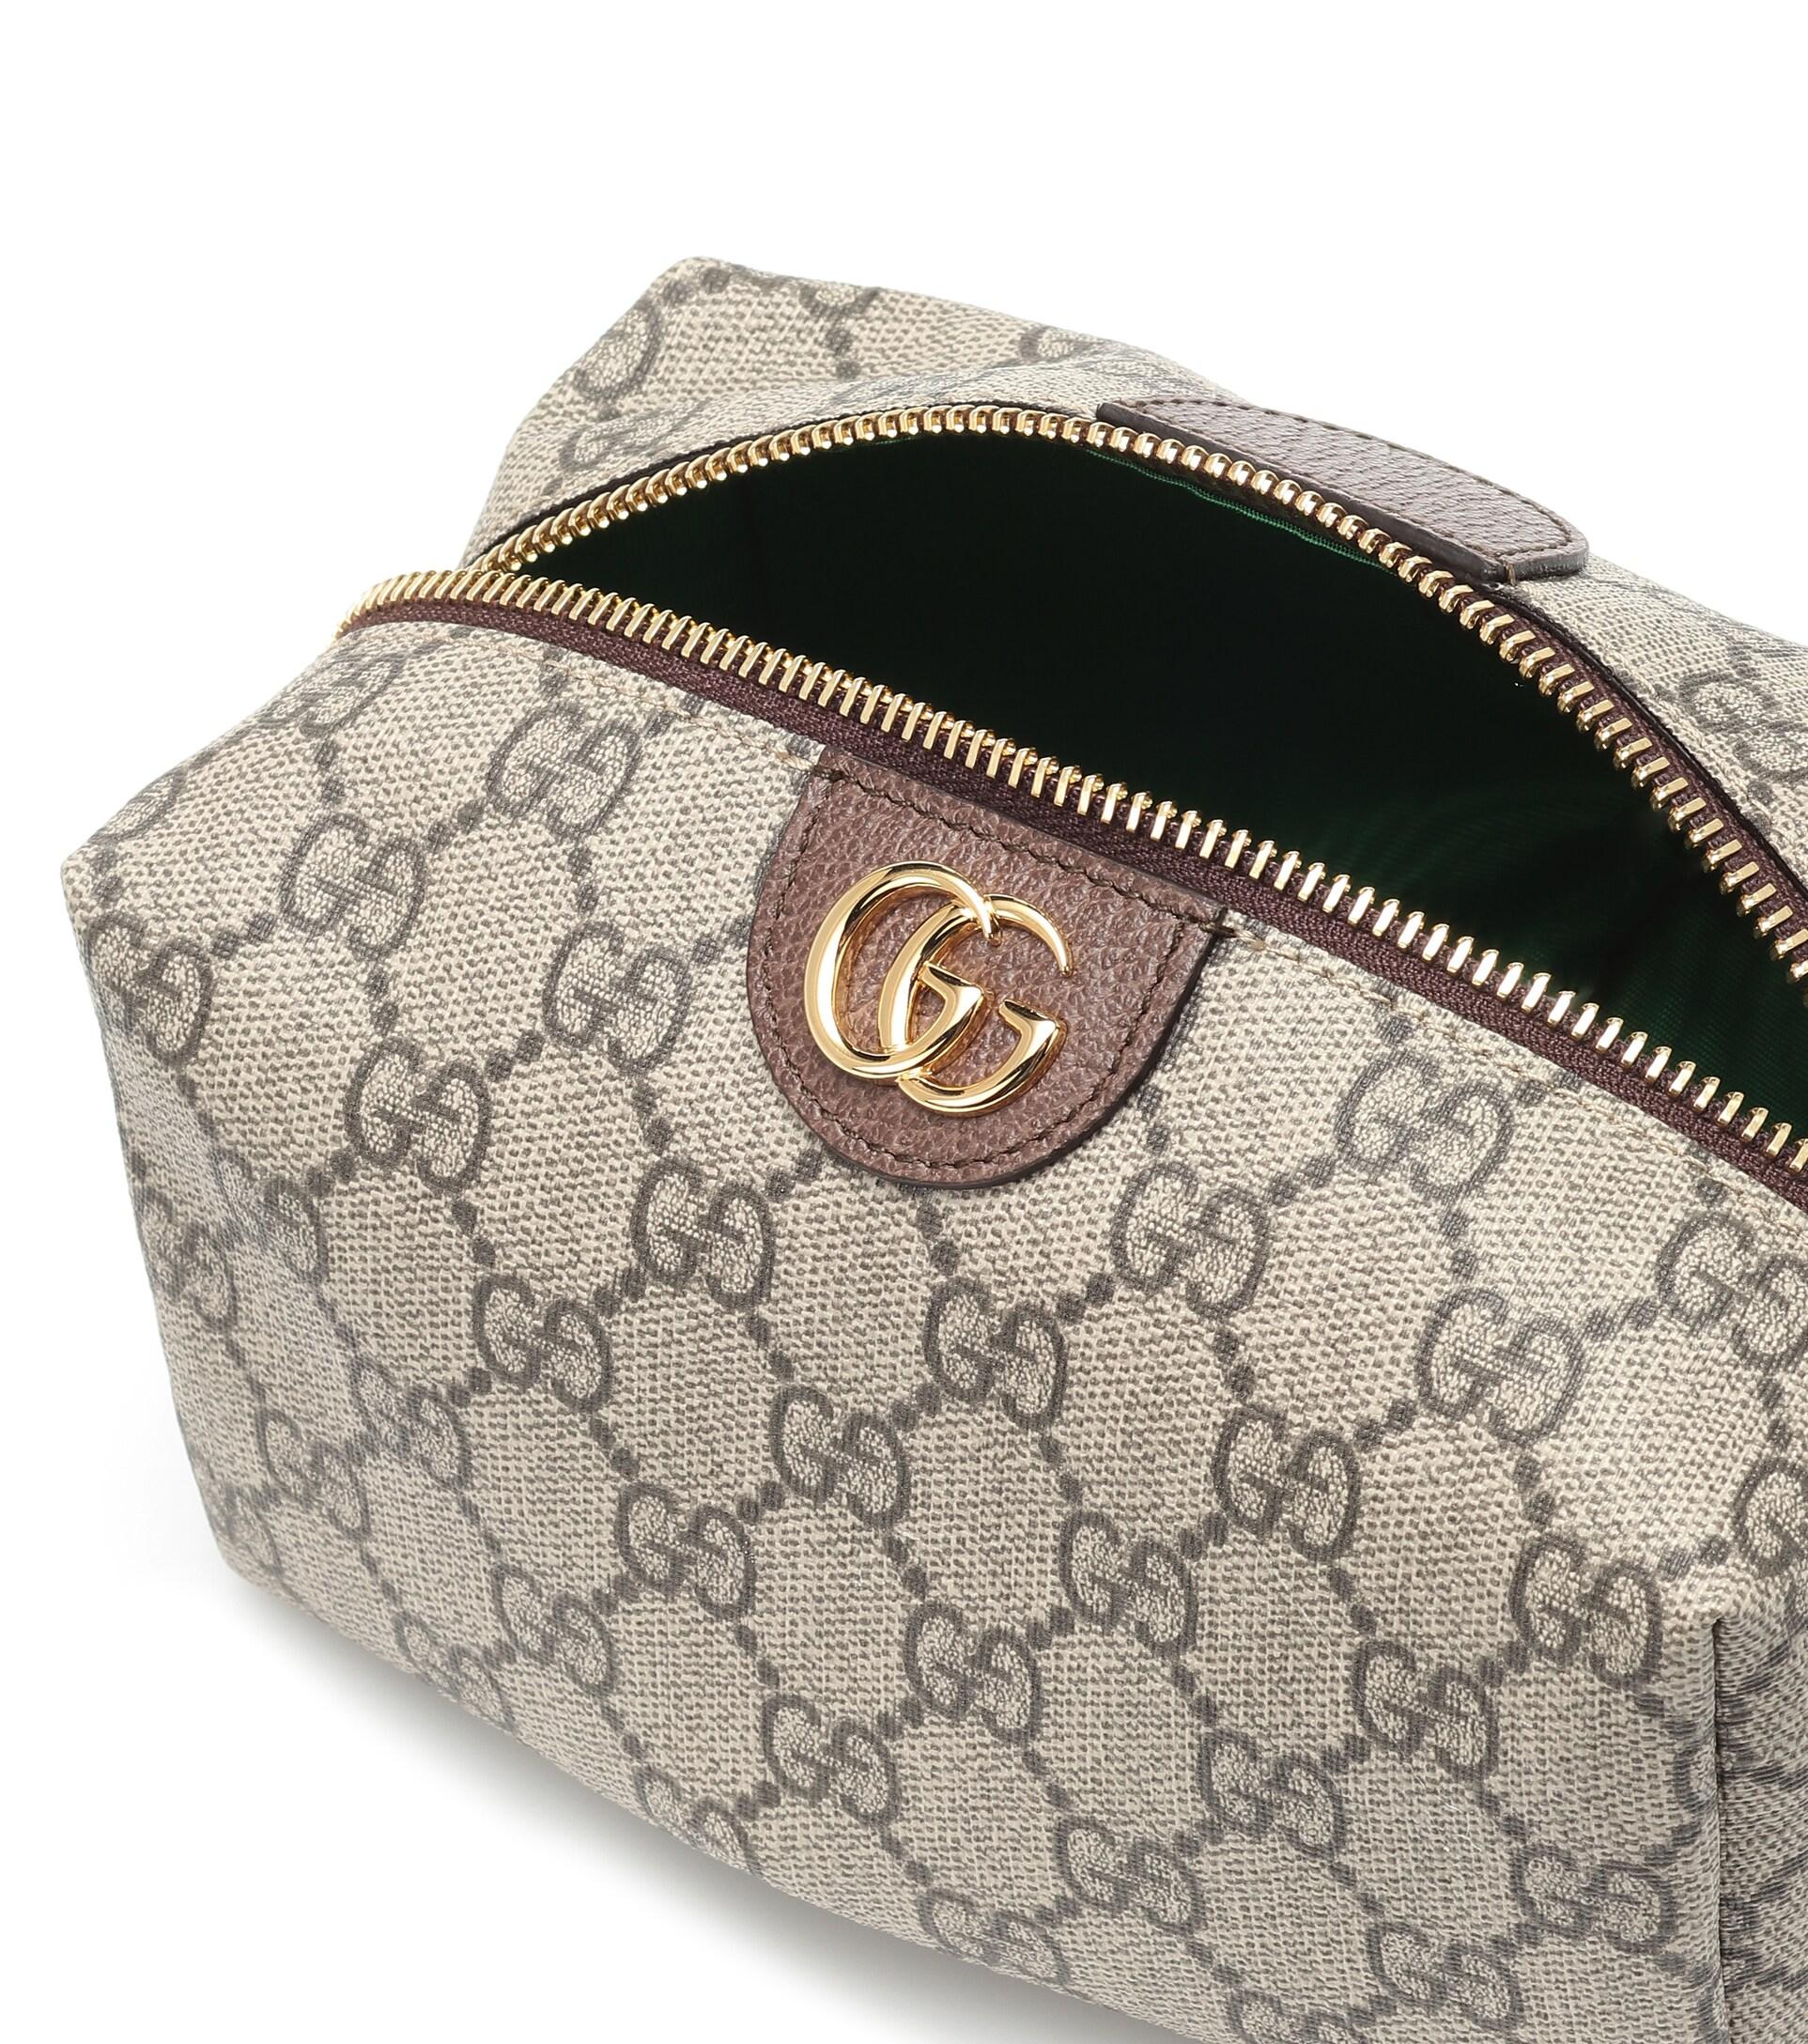 Gucci Ophidia GG Cosmetics Case in Gray | Lyst